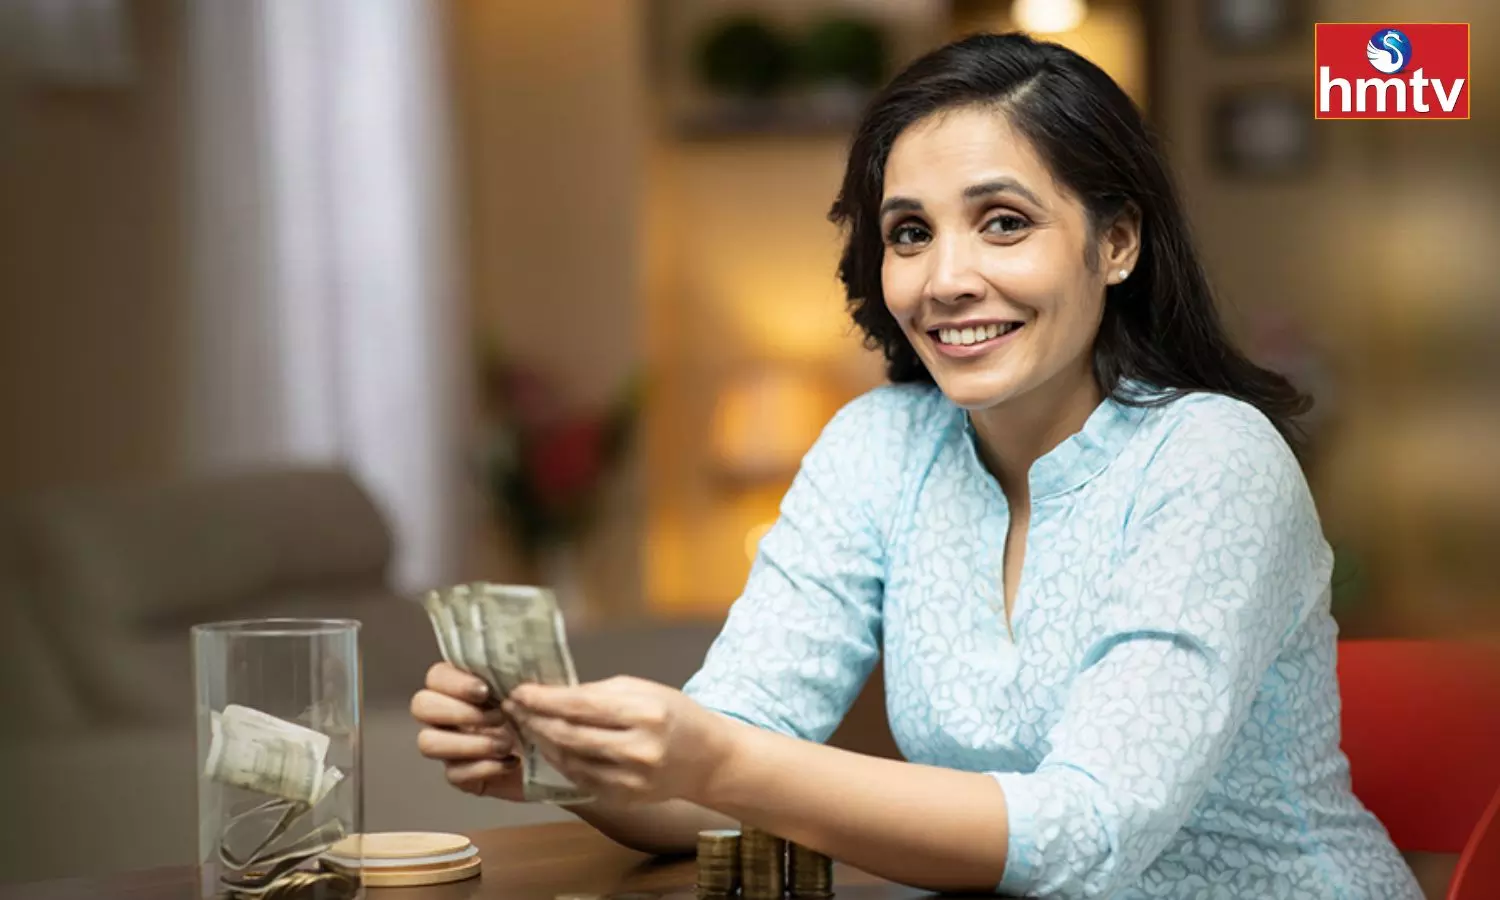 These schemes are related to women If you invest you can get high returns